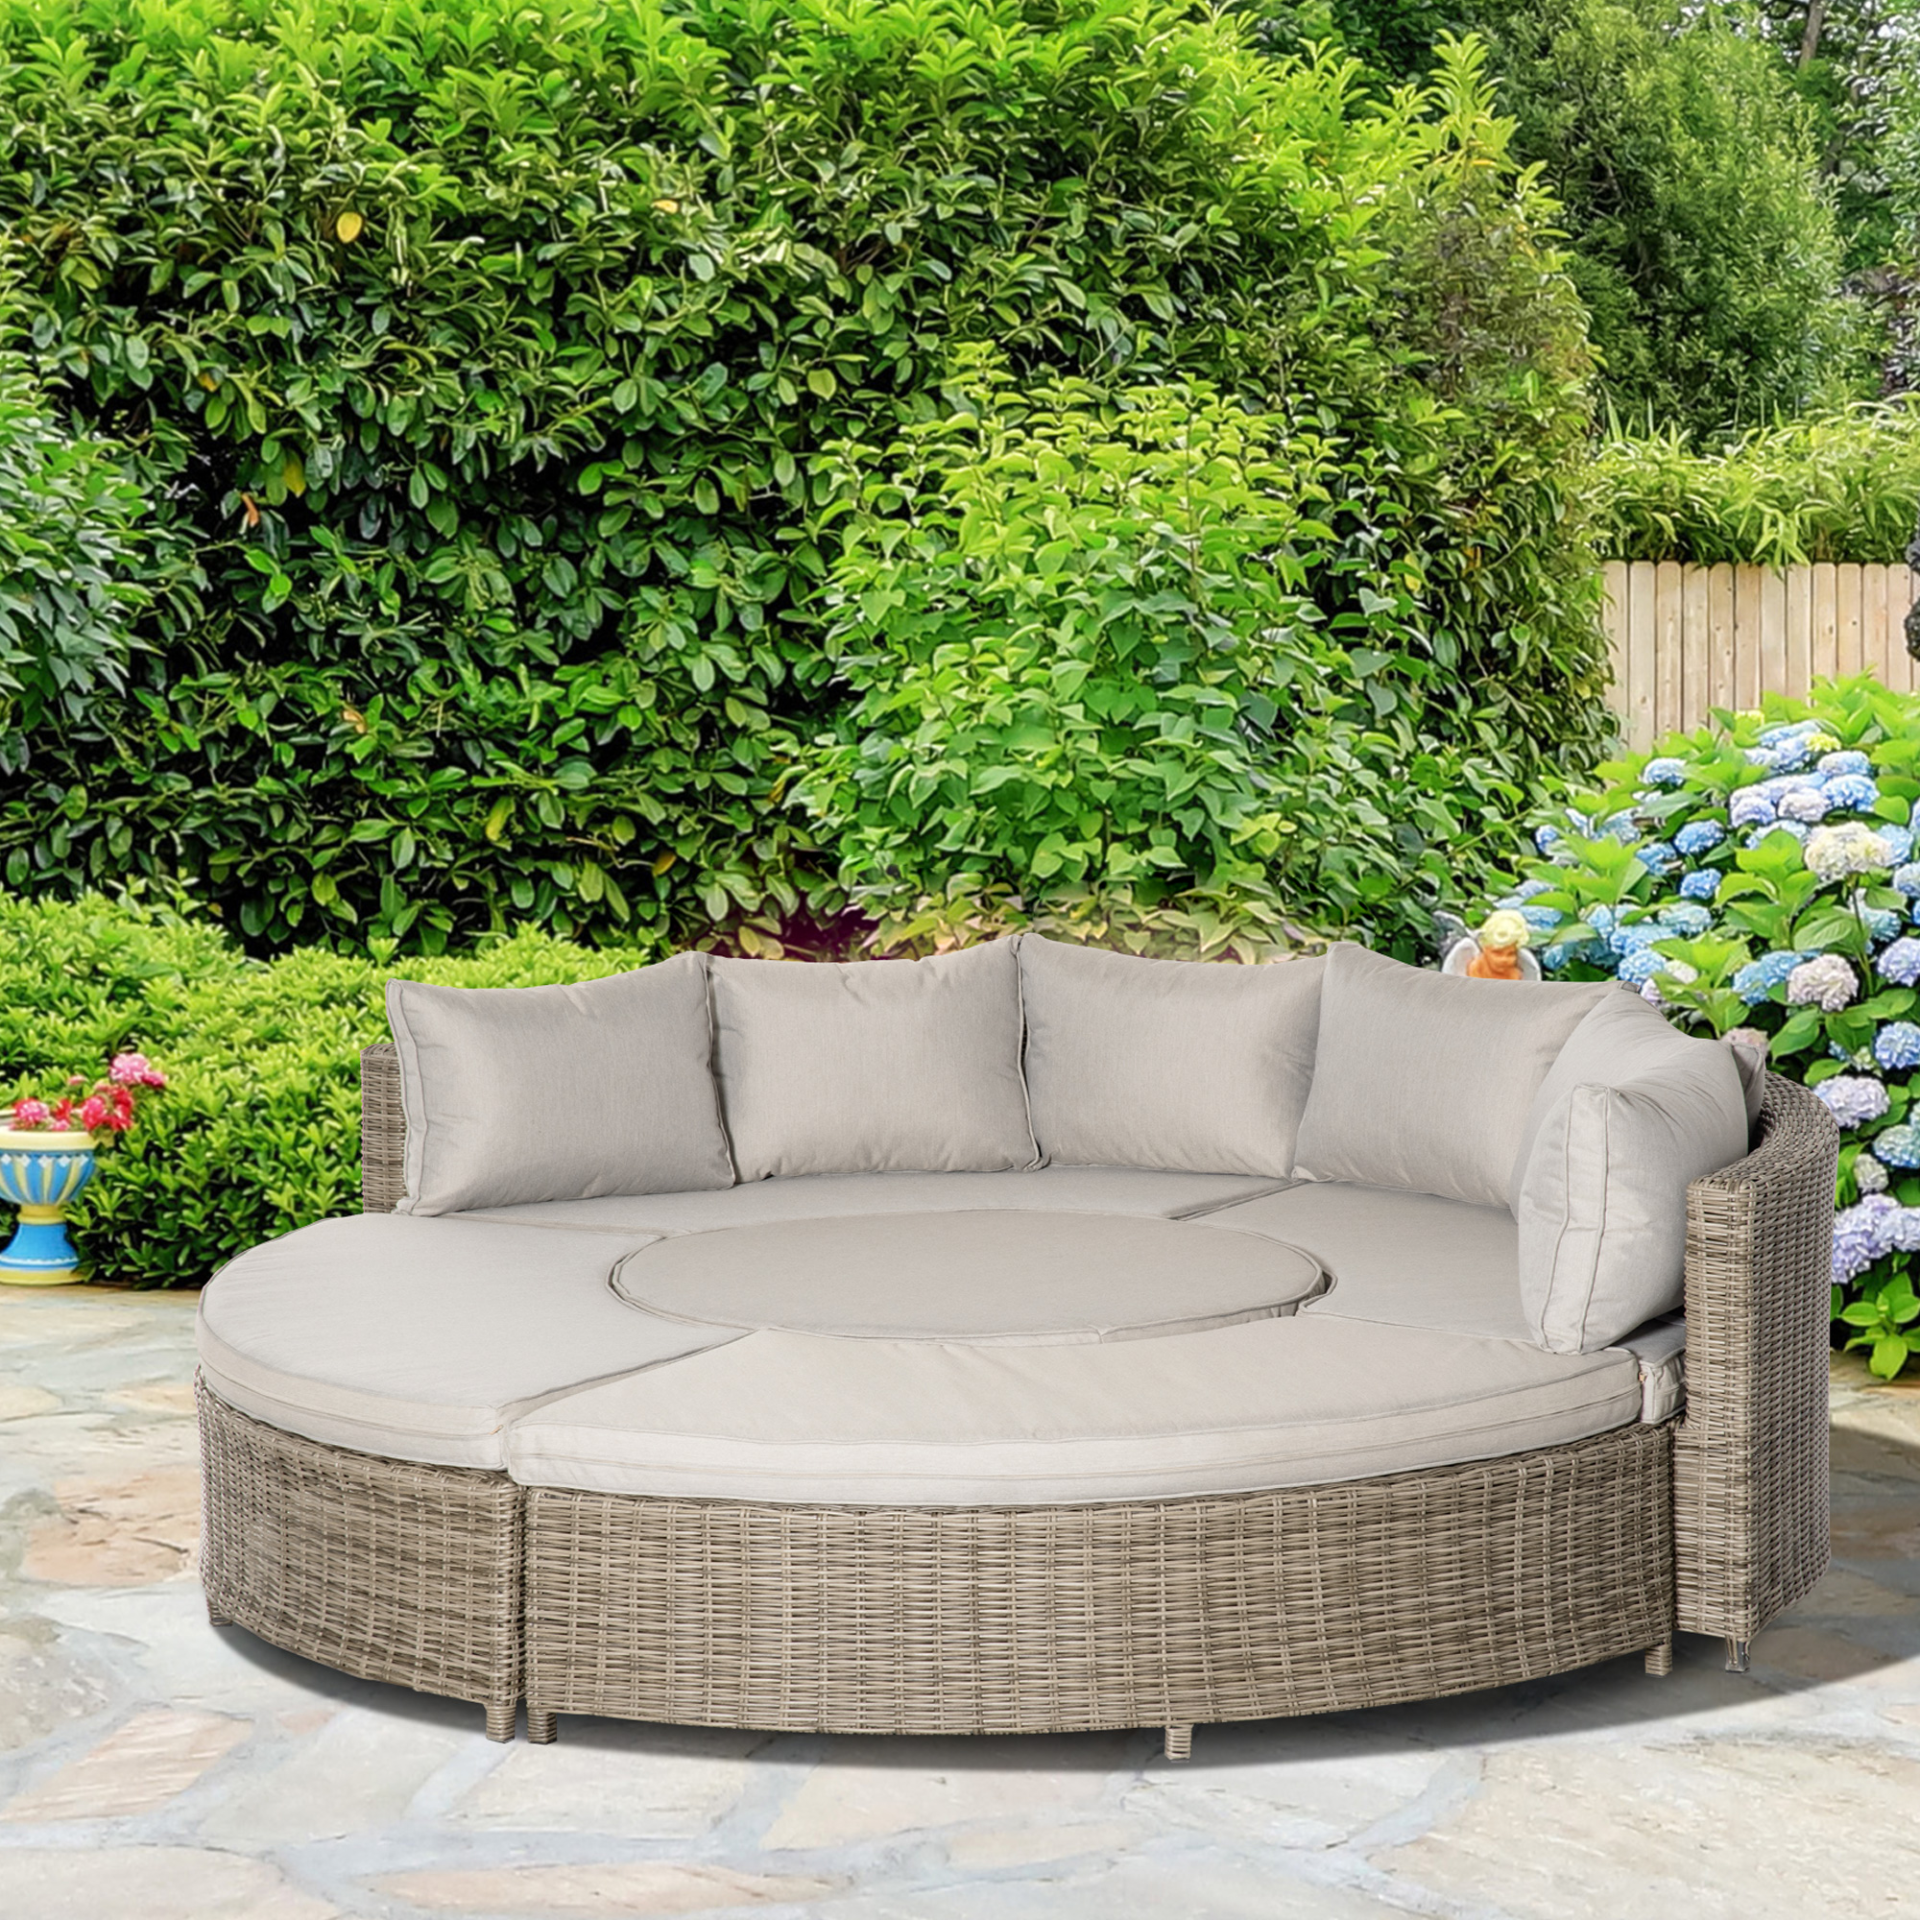 Outsunny 5 Pieces Outdoor PE Rattan Patio Furniture Set Lounge Chair Round Daybed Liftable Coffee Table Conversation Set with Olefin Cushion & Protect Cover